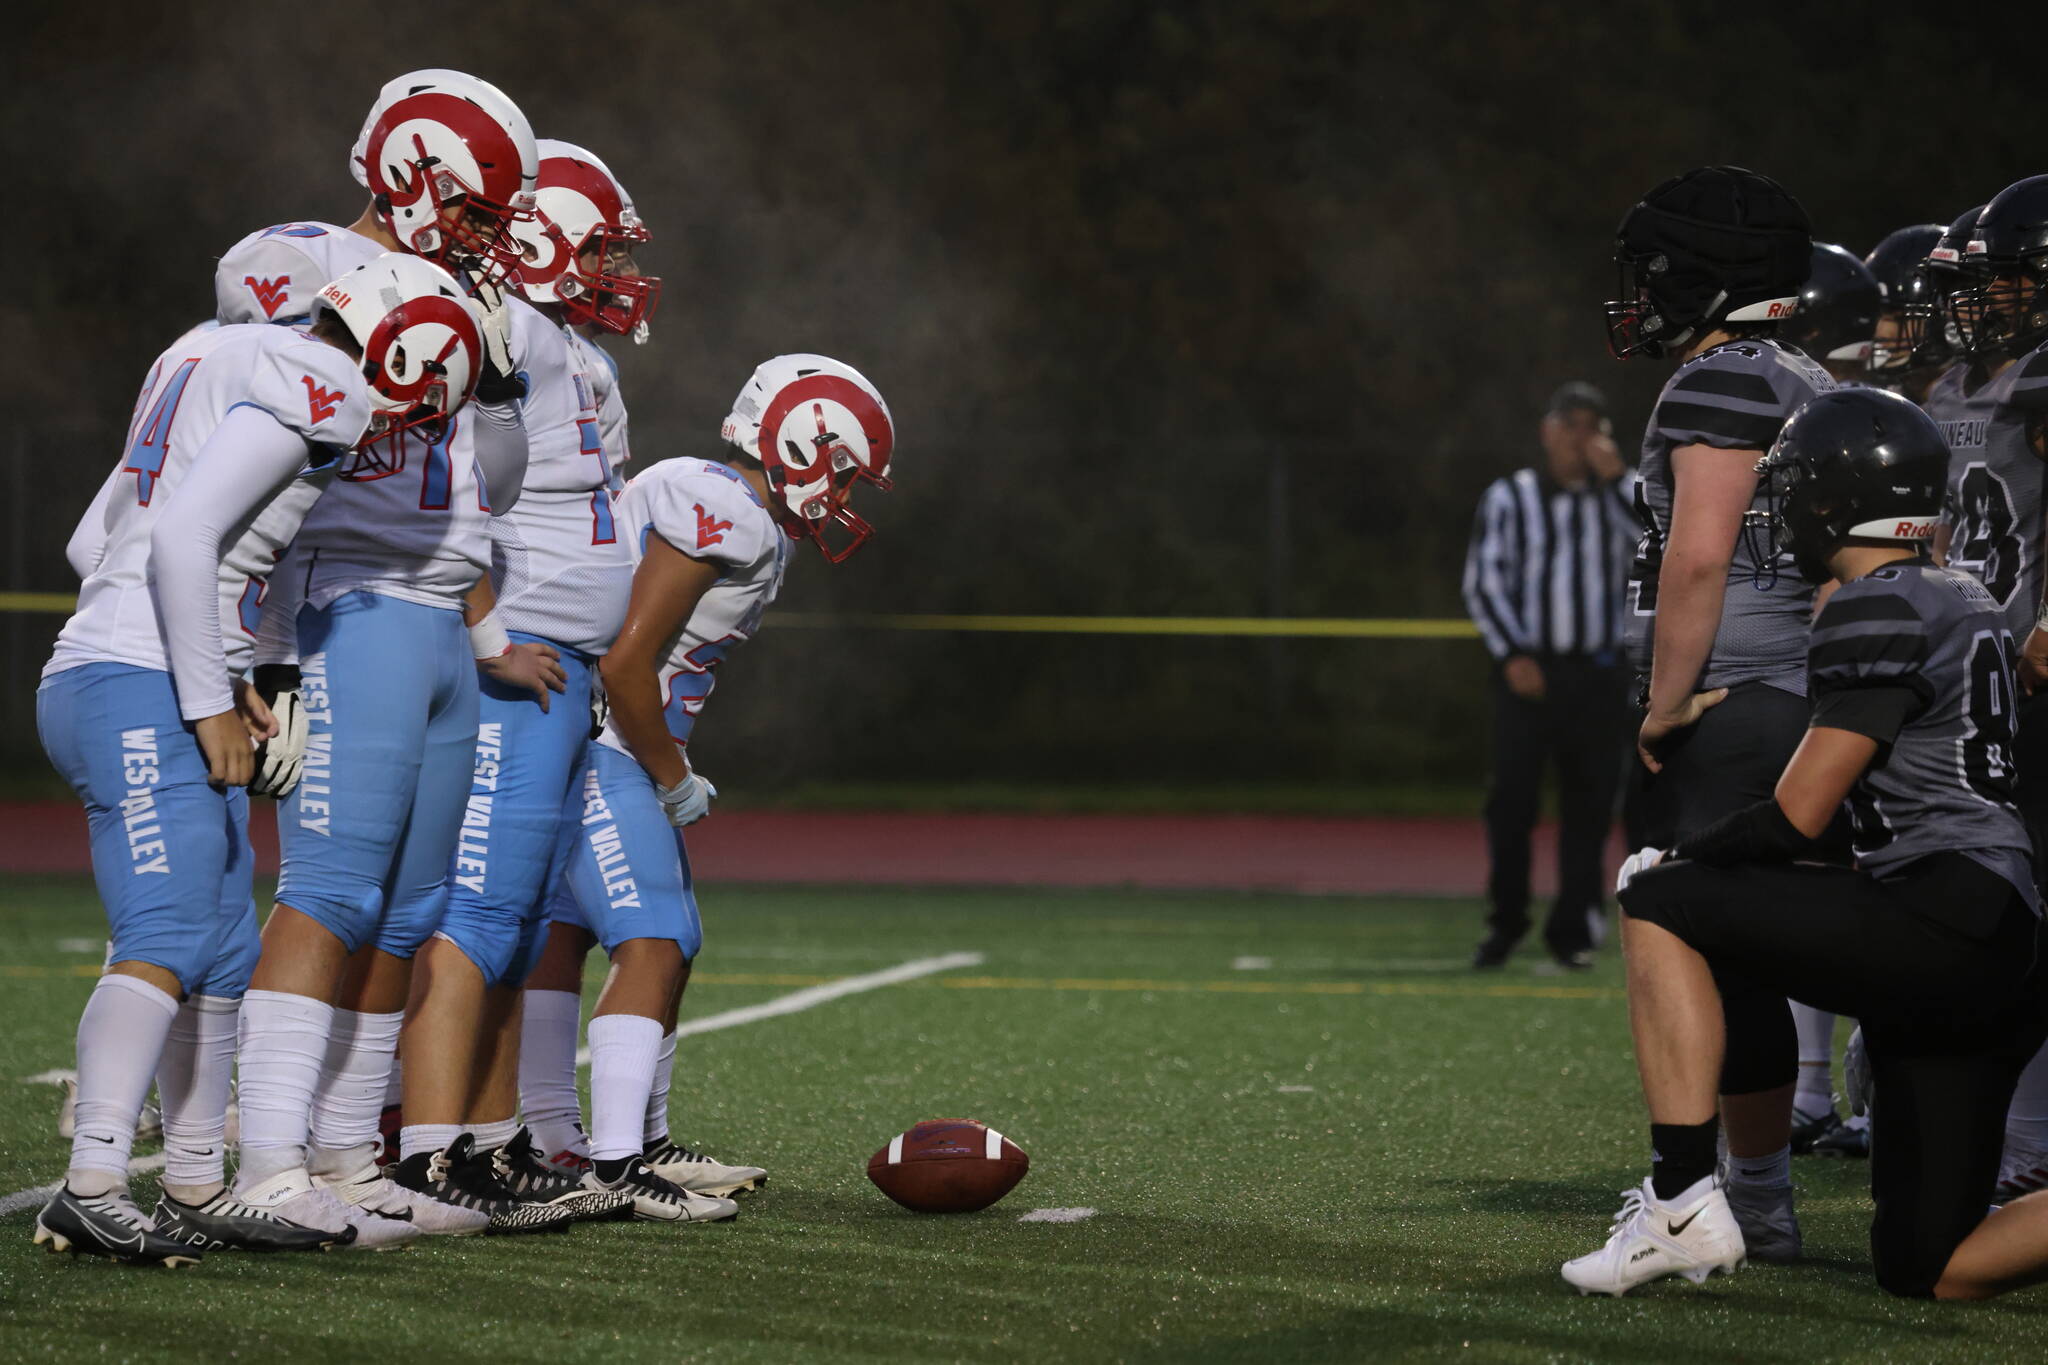 The West Valley Rams offense prepares to get set at the line of scrimmage. (Ben Hohenstatt / Juneau Empire)